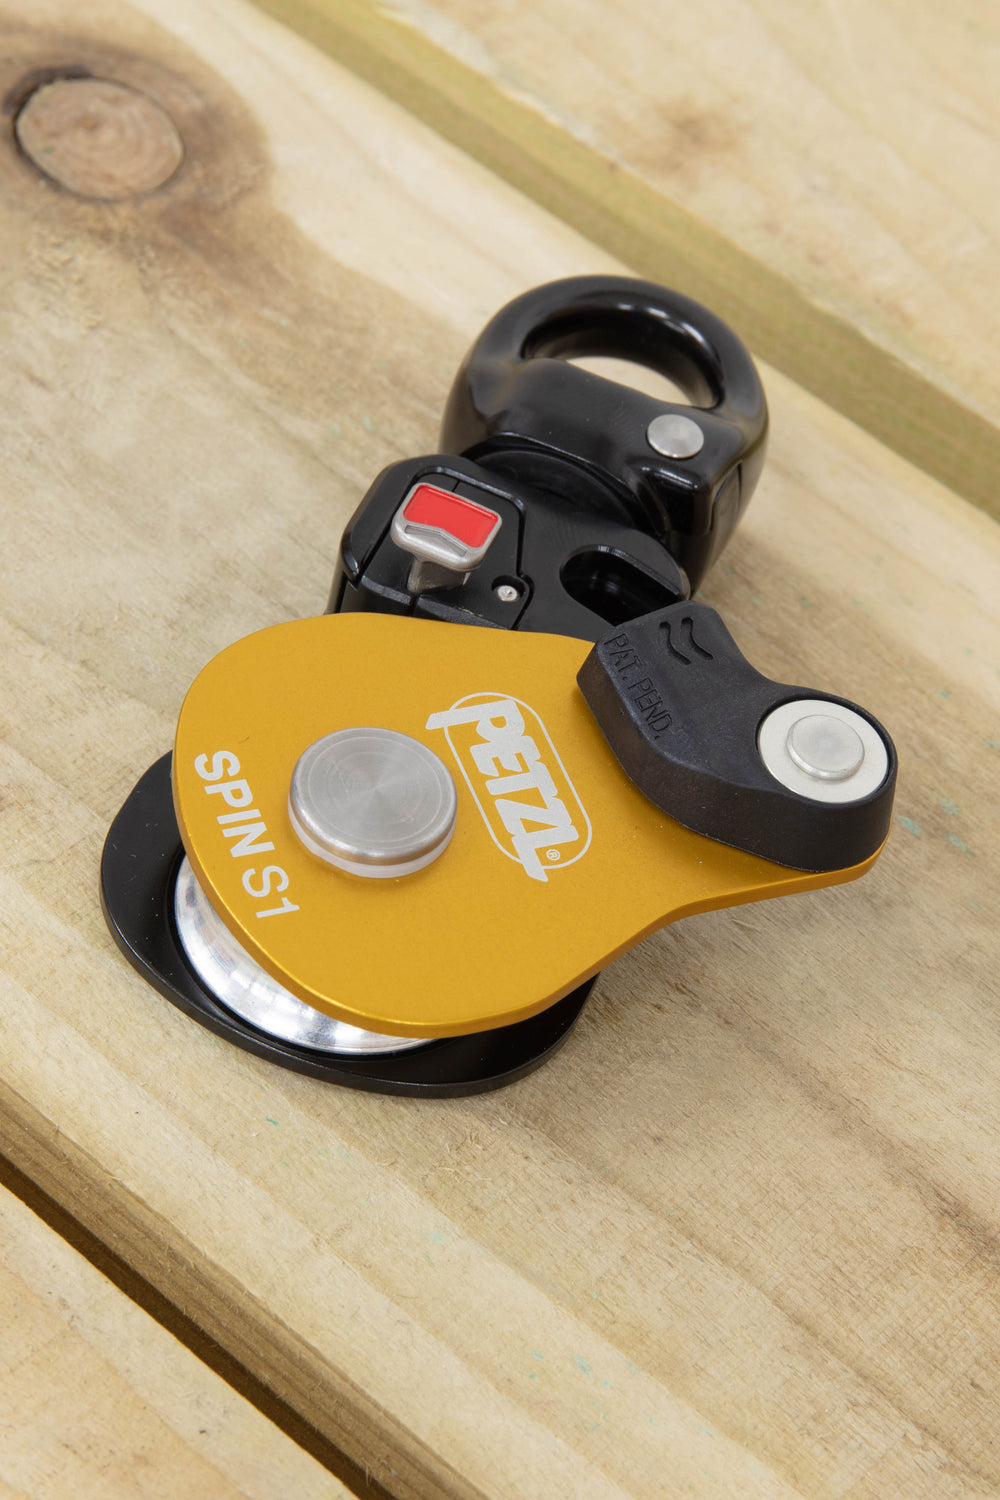 Petzl - Spin S1 Pulley (2022)